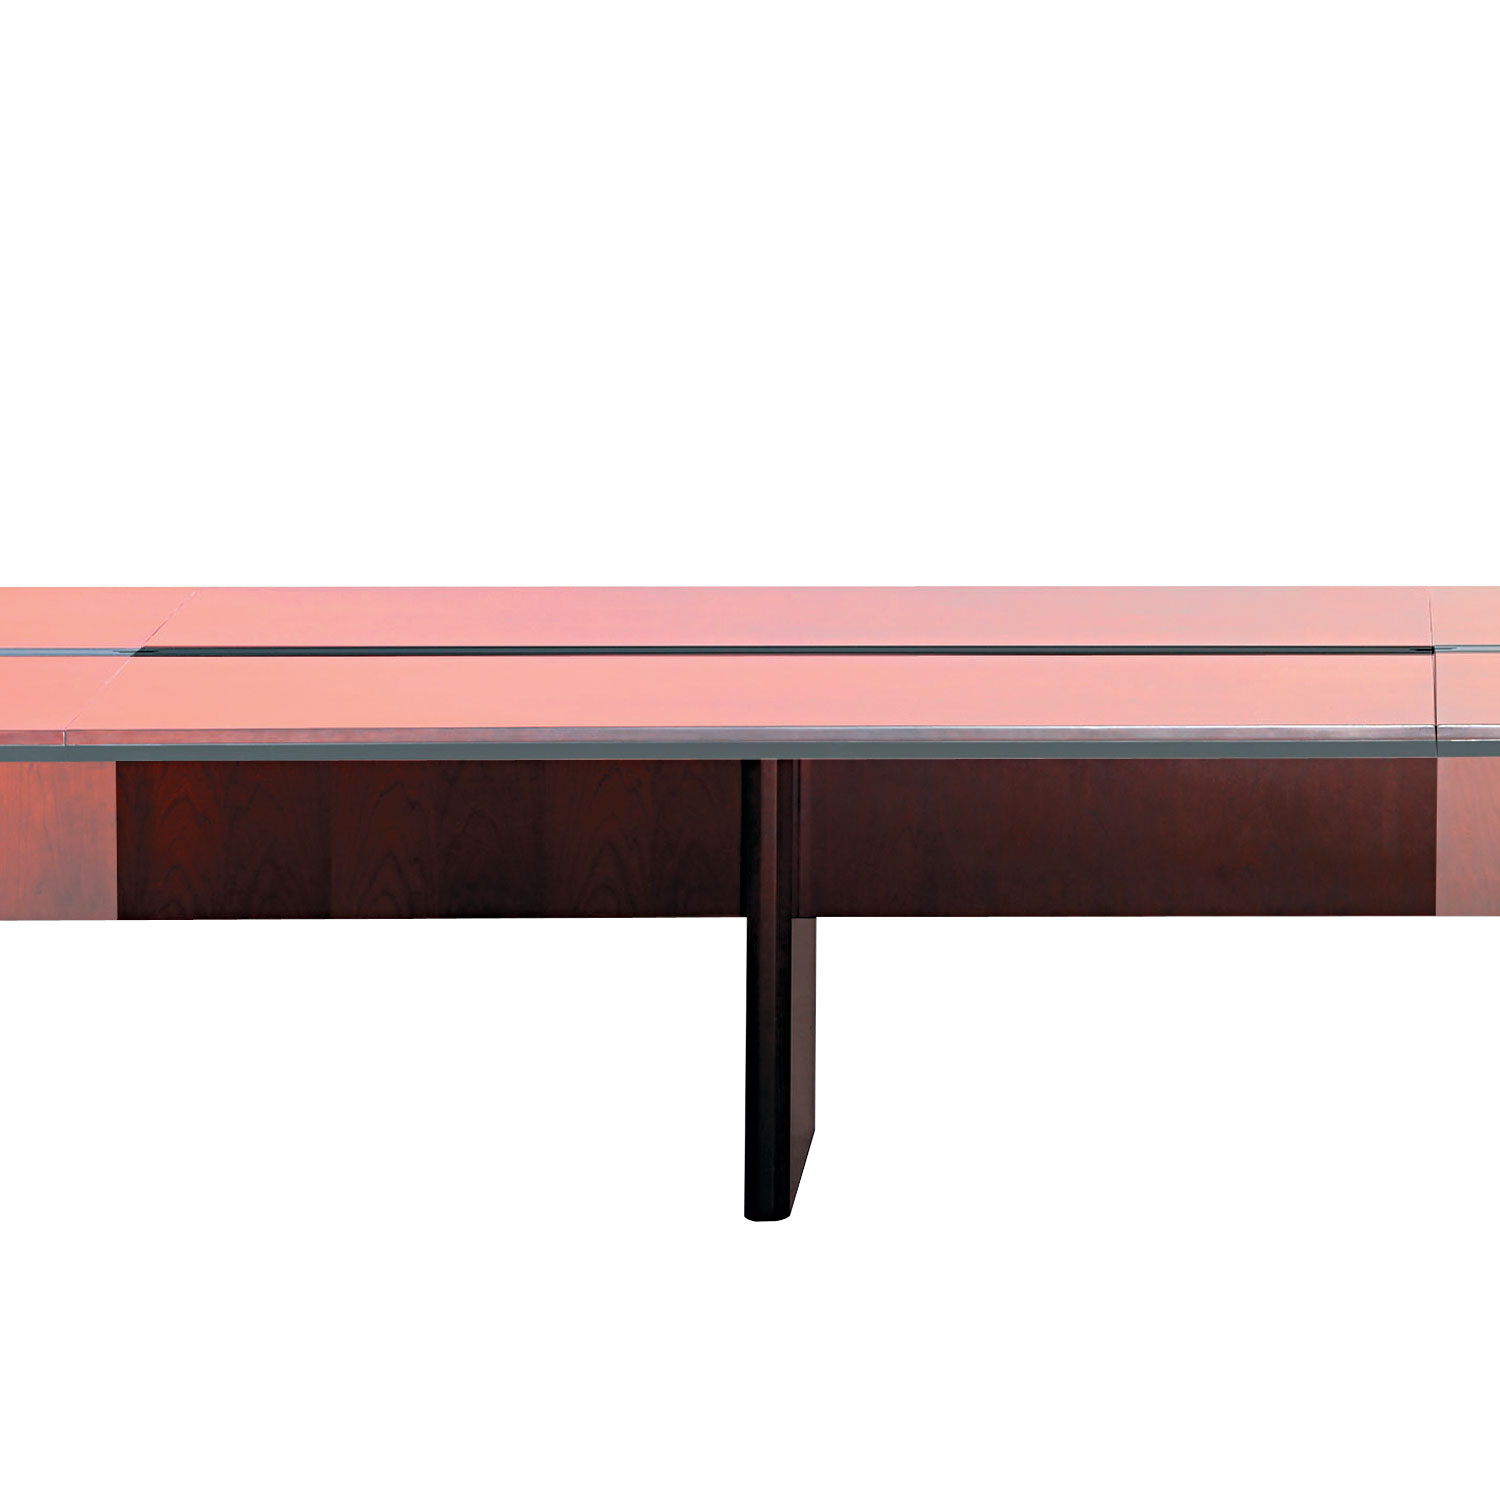 Corsica Conference Series 6 Adder Modular Table Base, Sierra Cherry